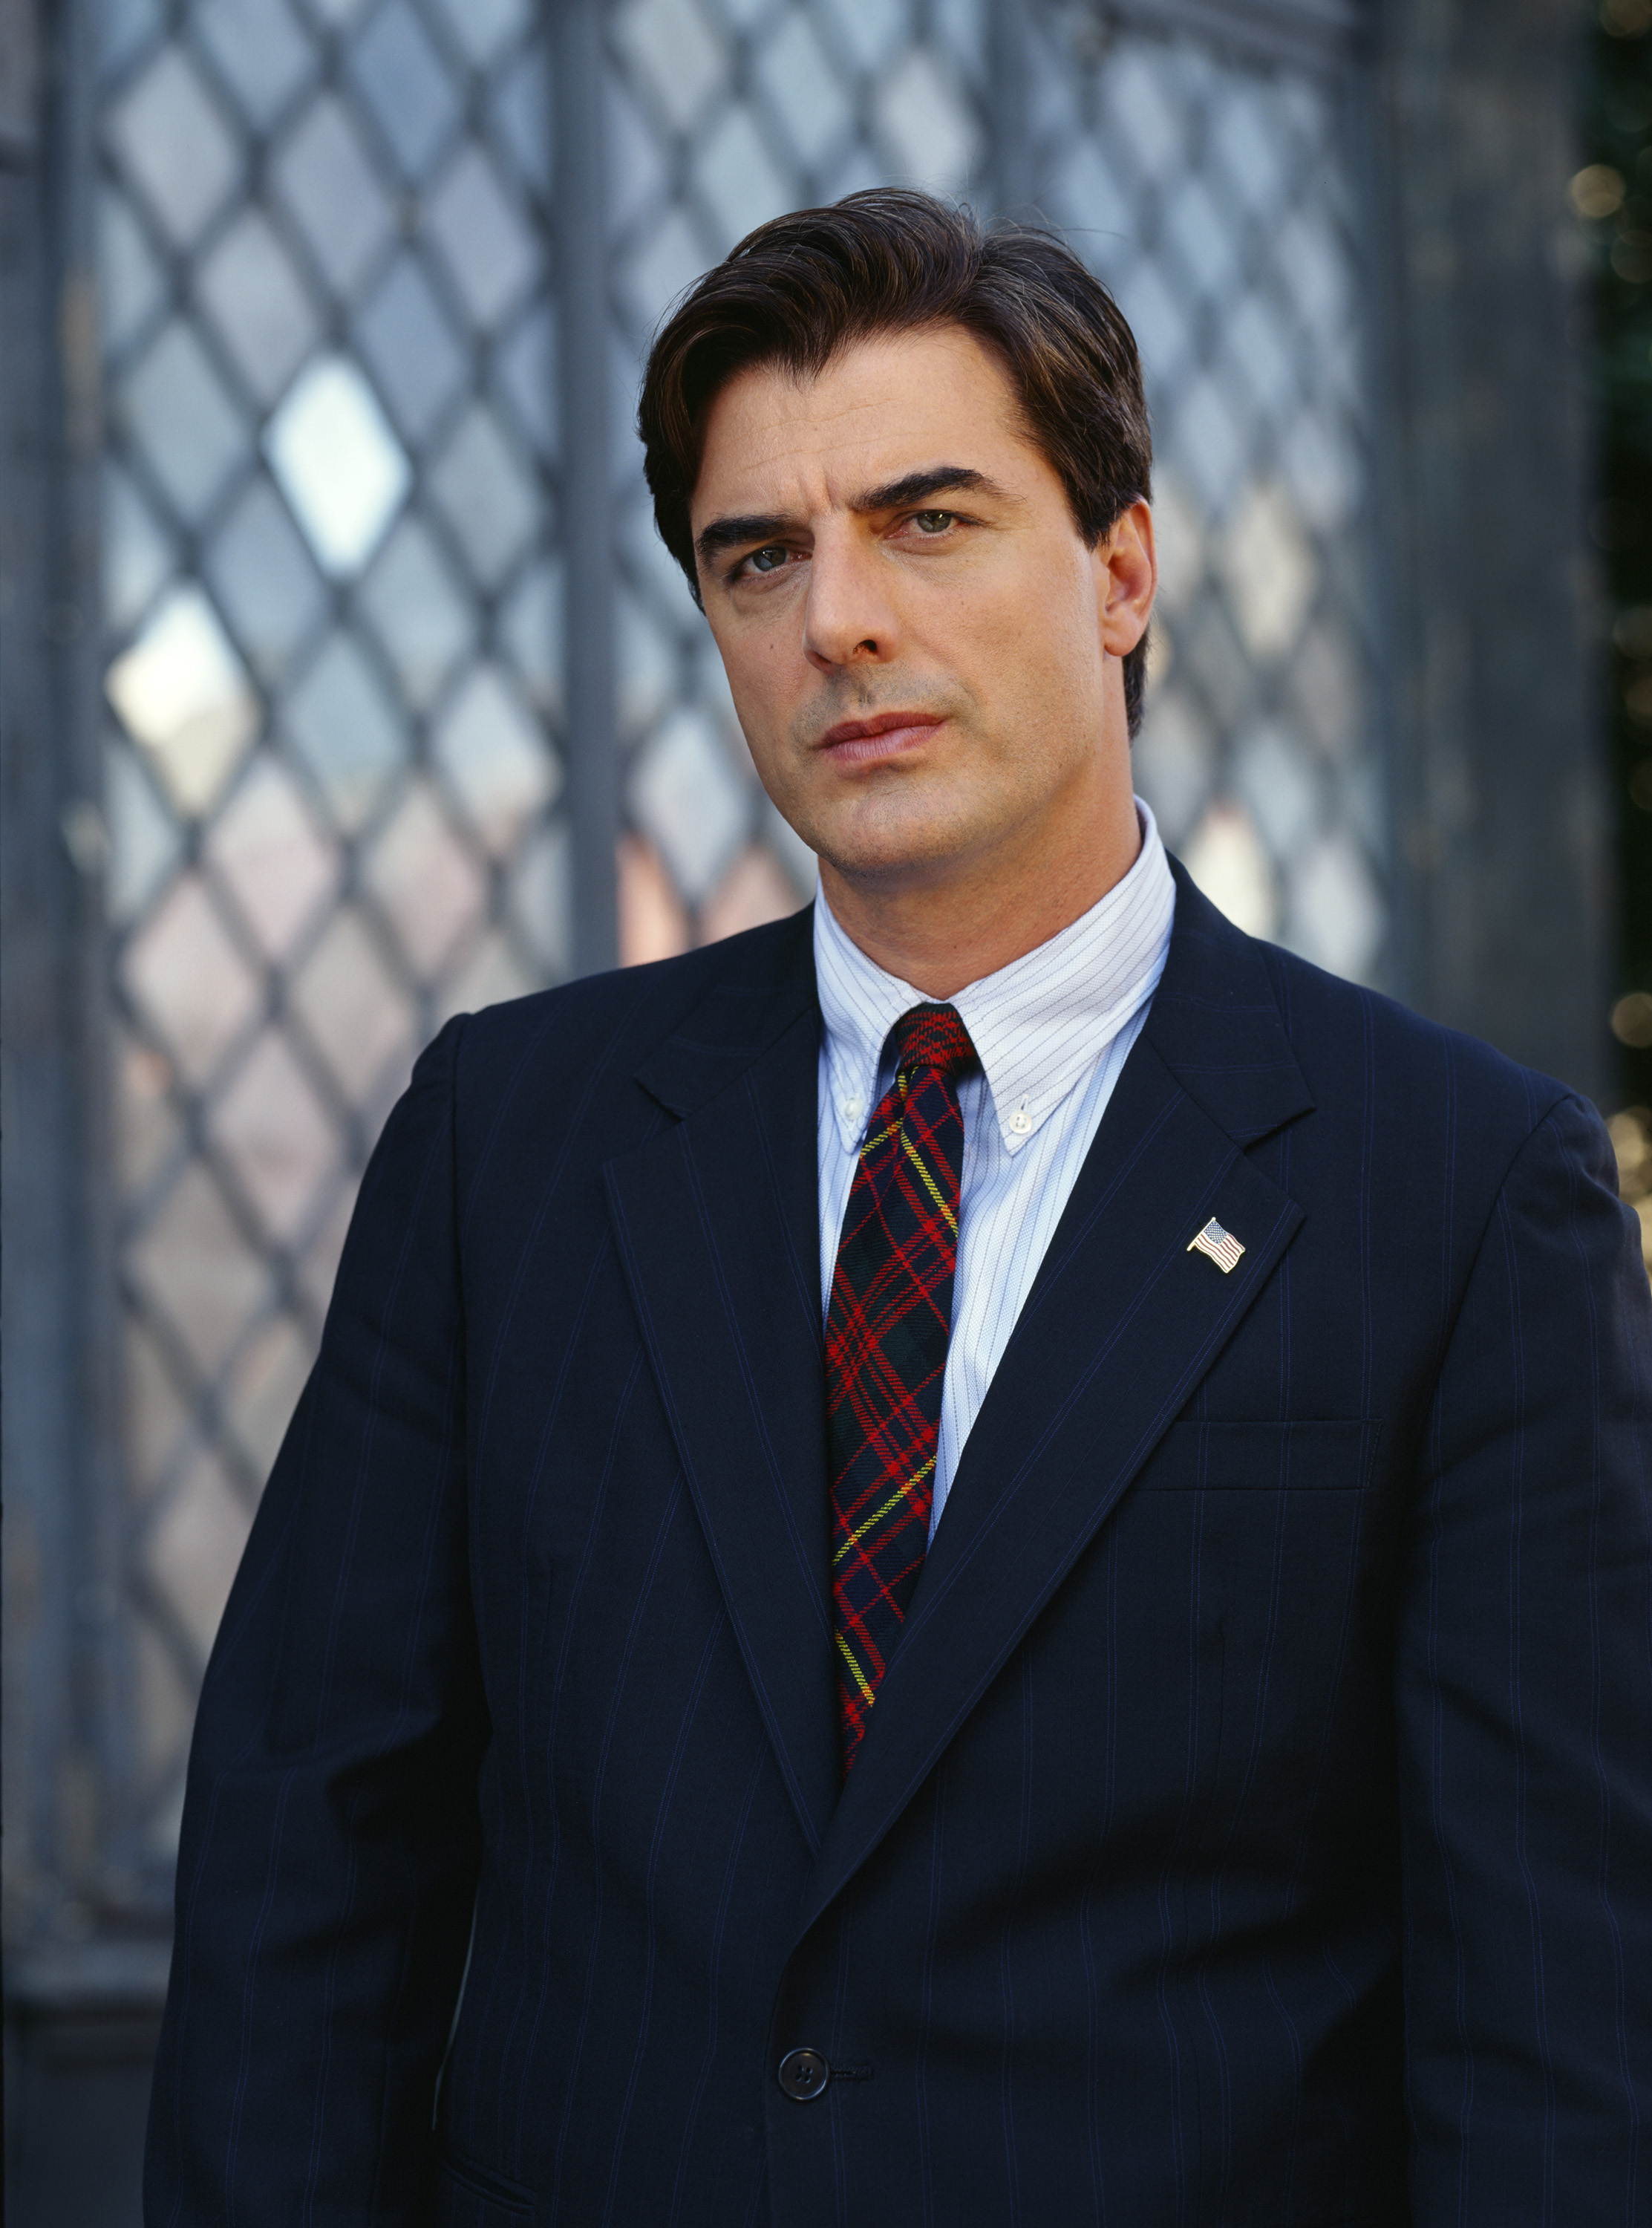 Chris Noth as Detective Mike Logan in "Exiled: A Law & Order Movie" | Source: Getty Images